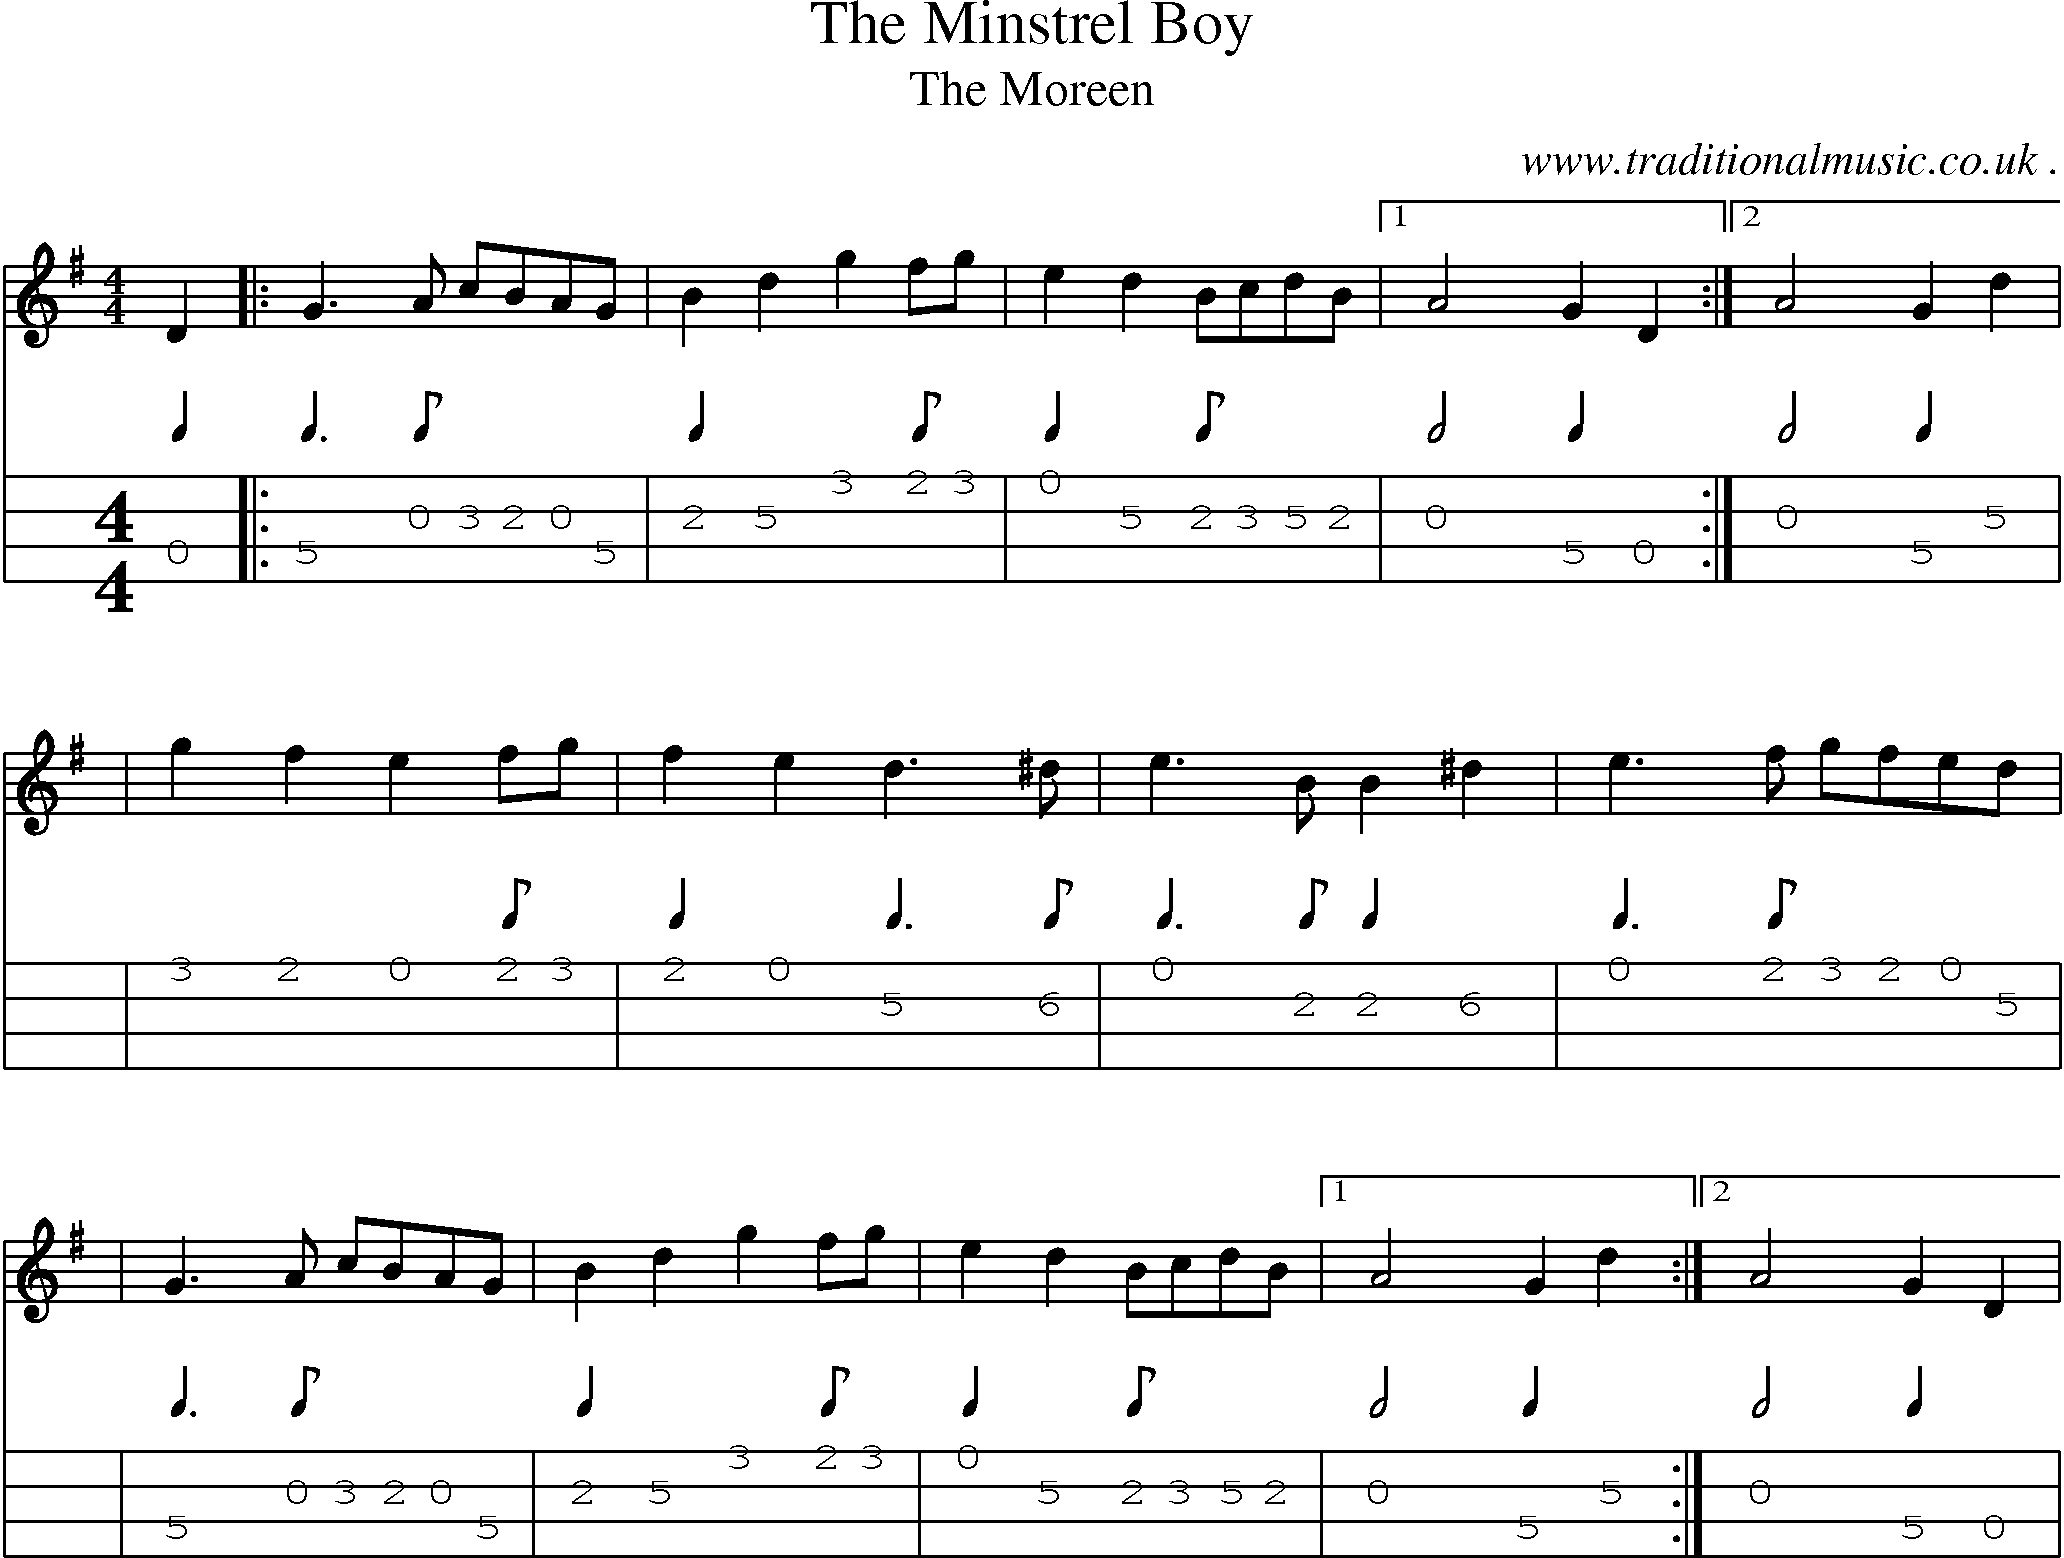 Sheet-Music and Mandolin Tabs for The Minstrel Boy